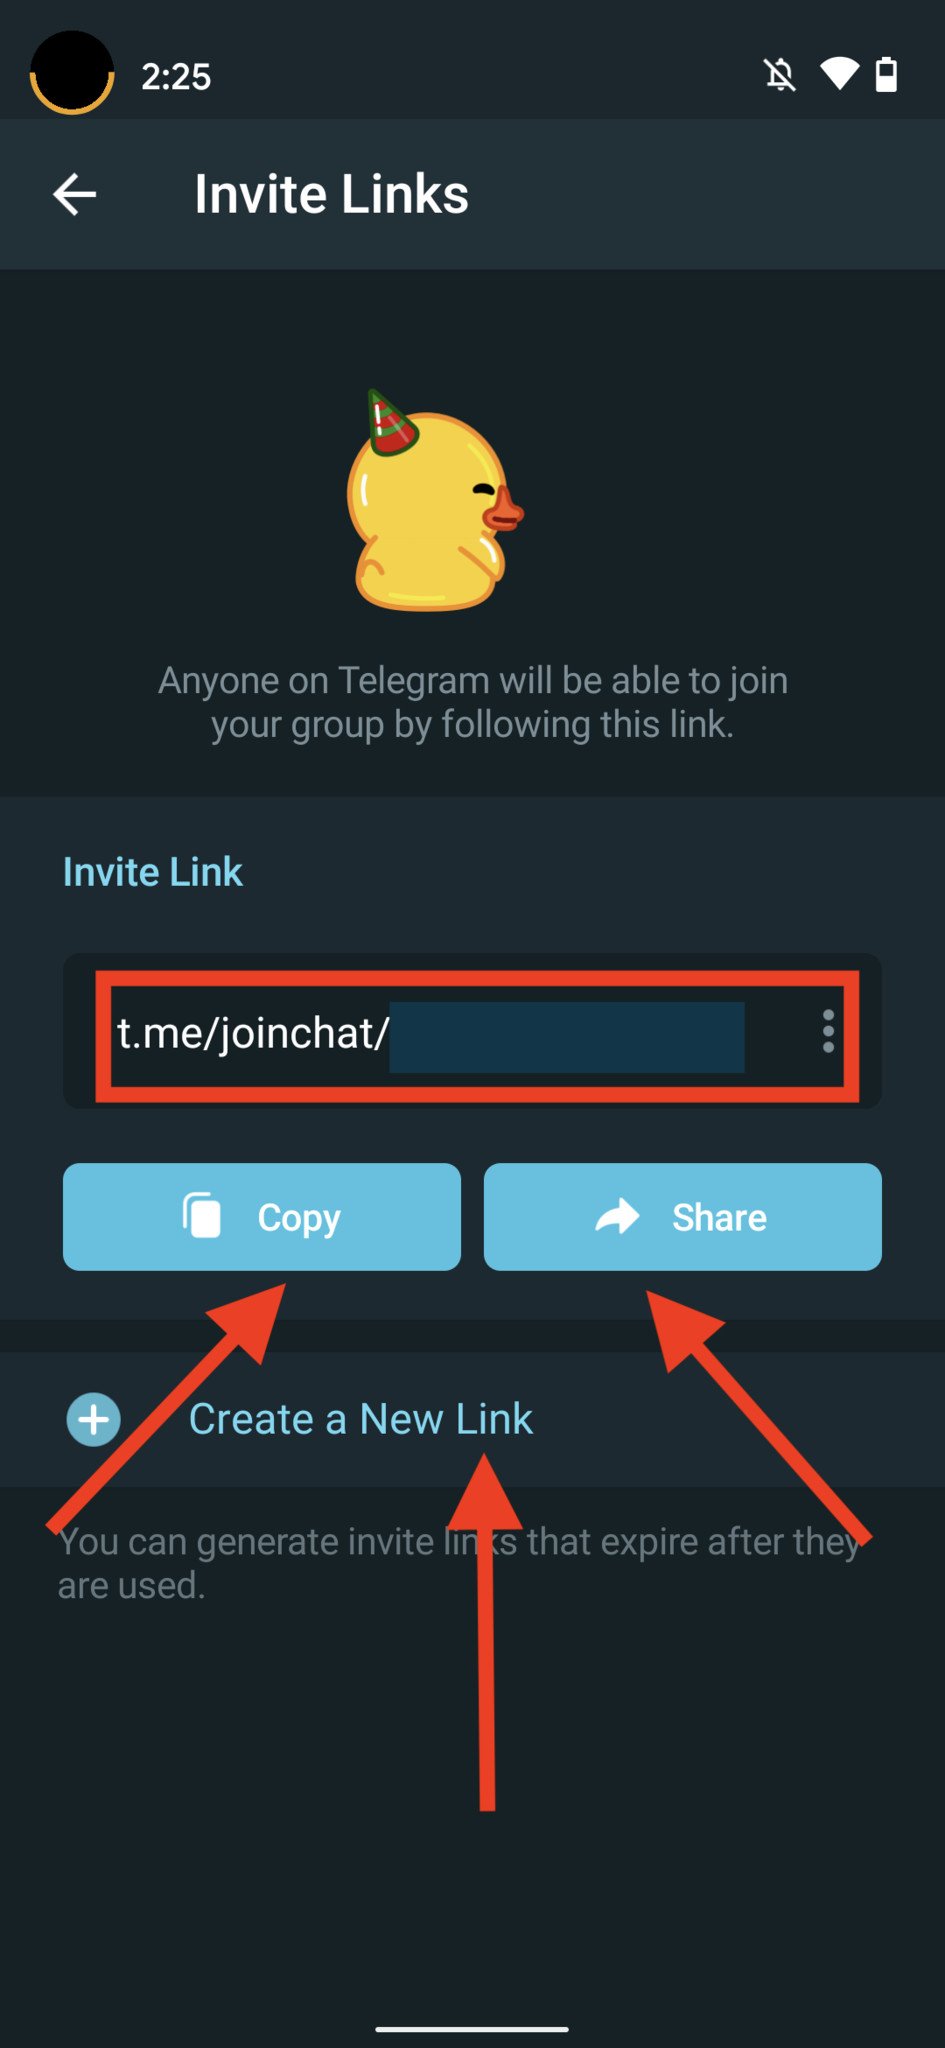 Telegram flexible forwarding and automatic jumping to the next channel